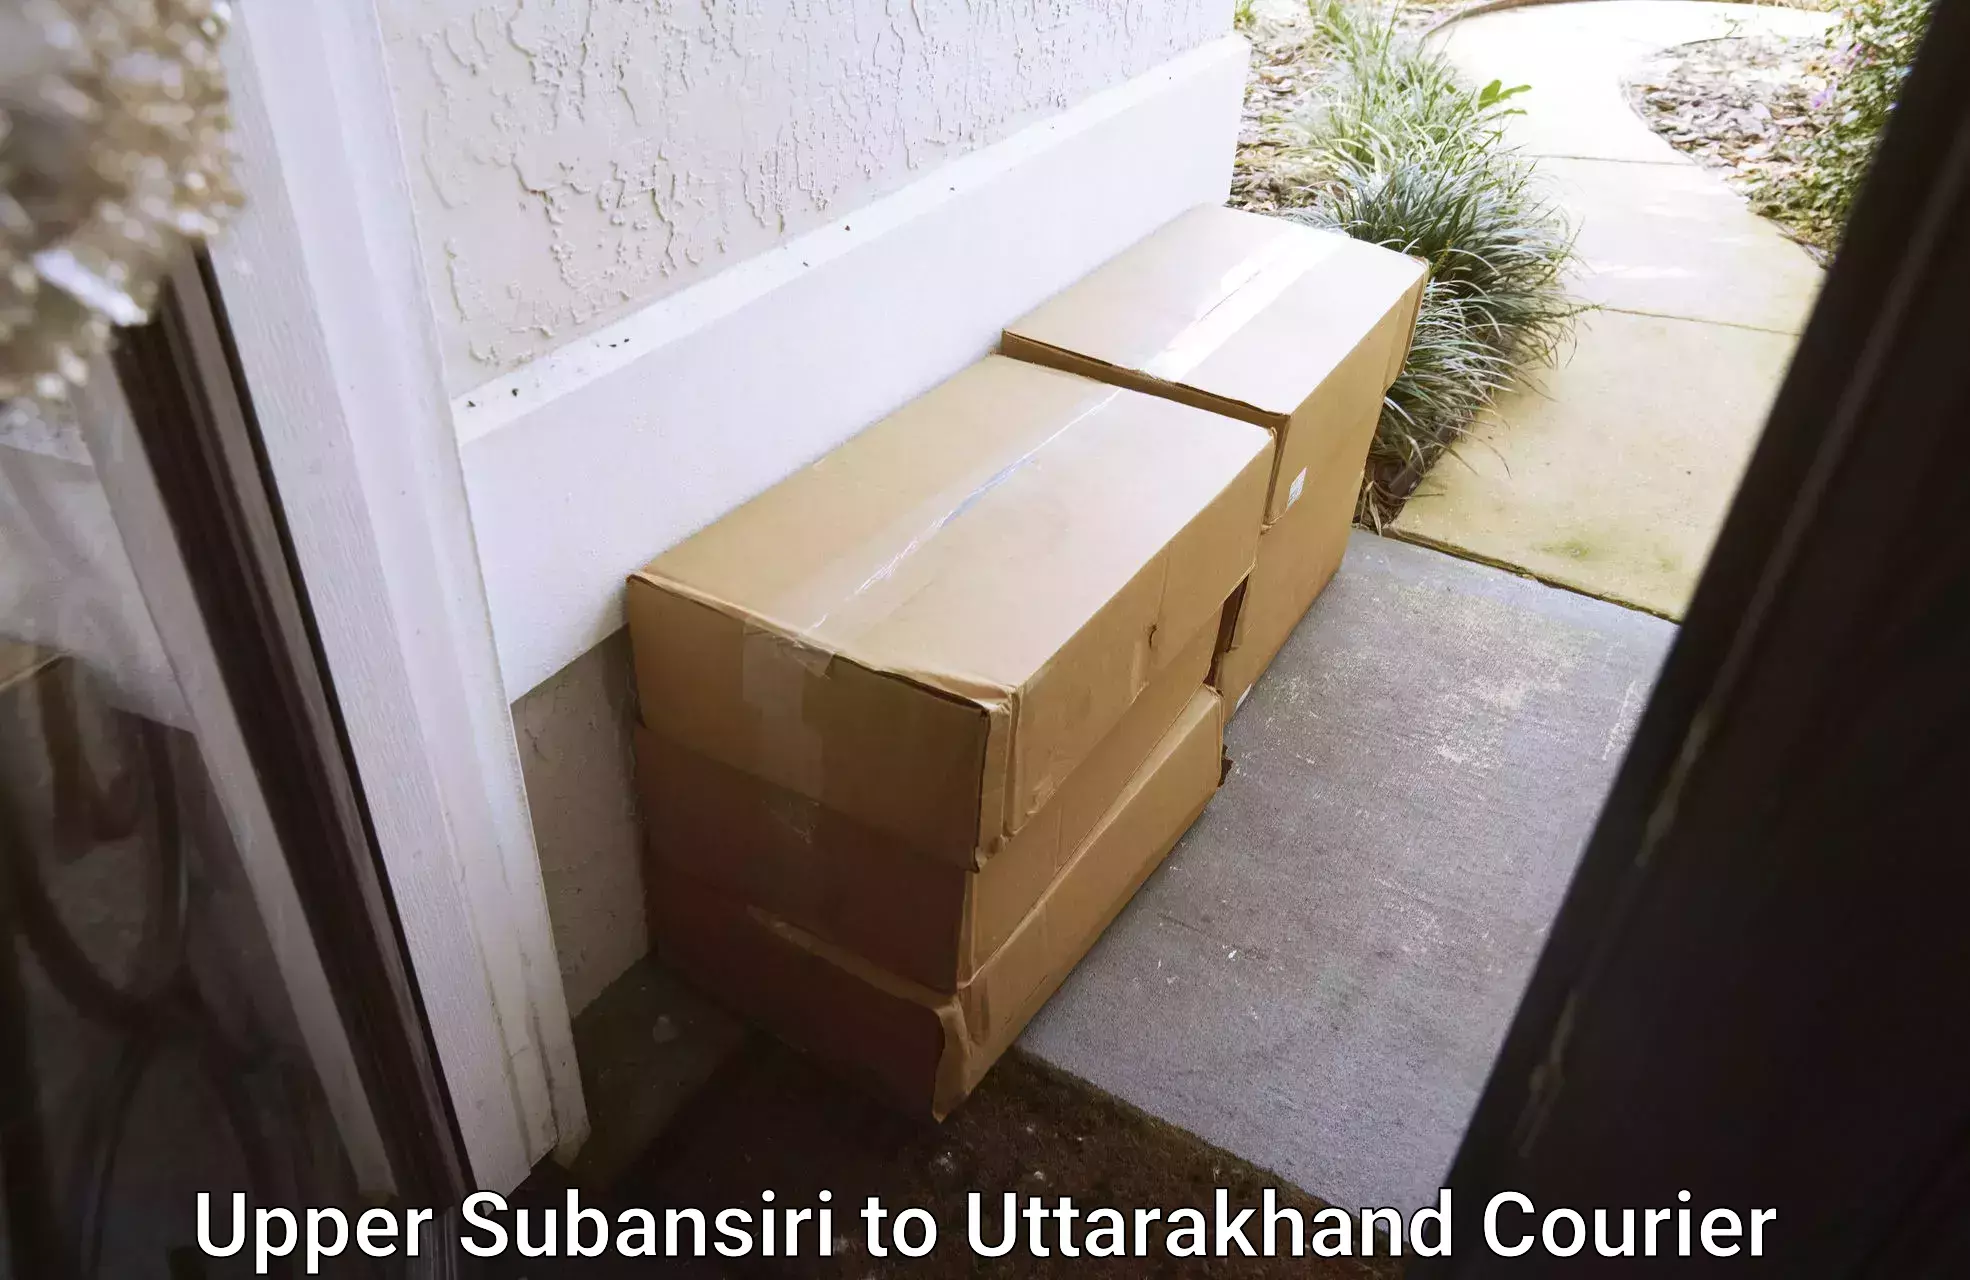 Corporate courier solutions Upper Subansiri to Lansdowne